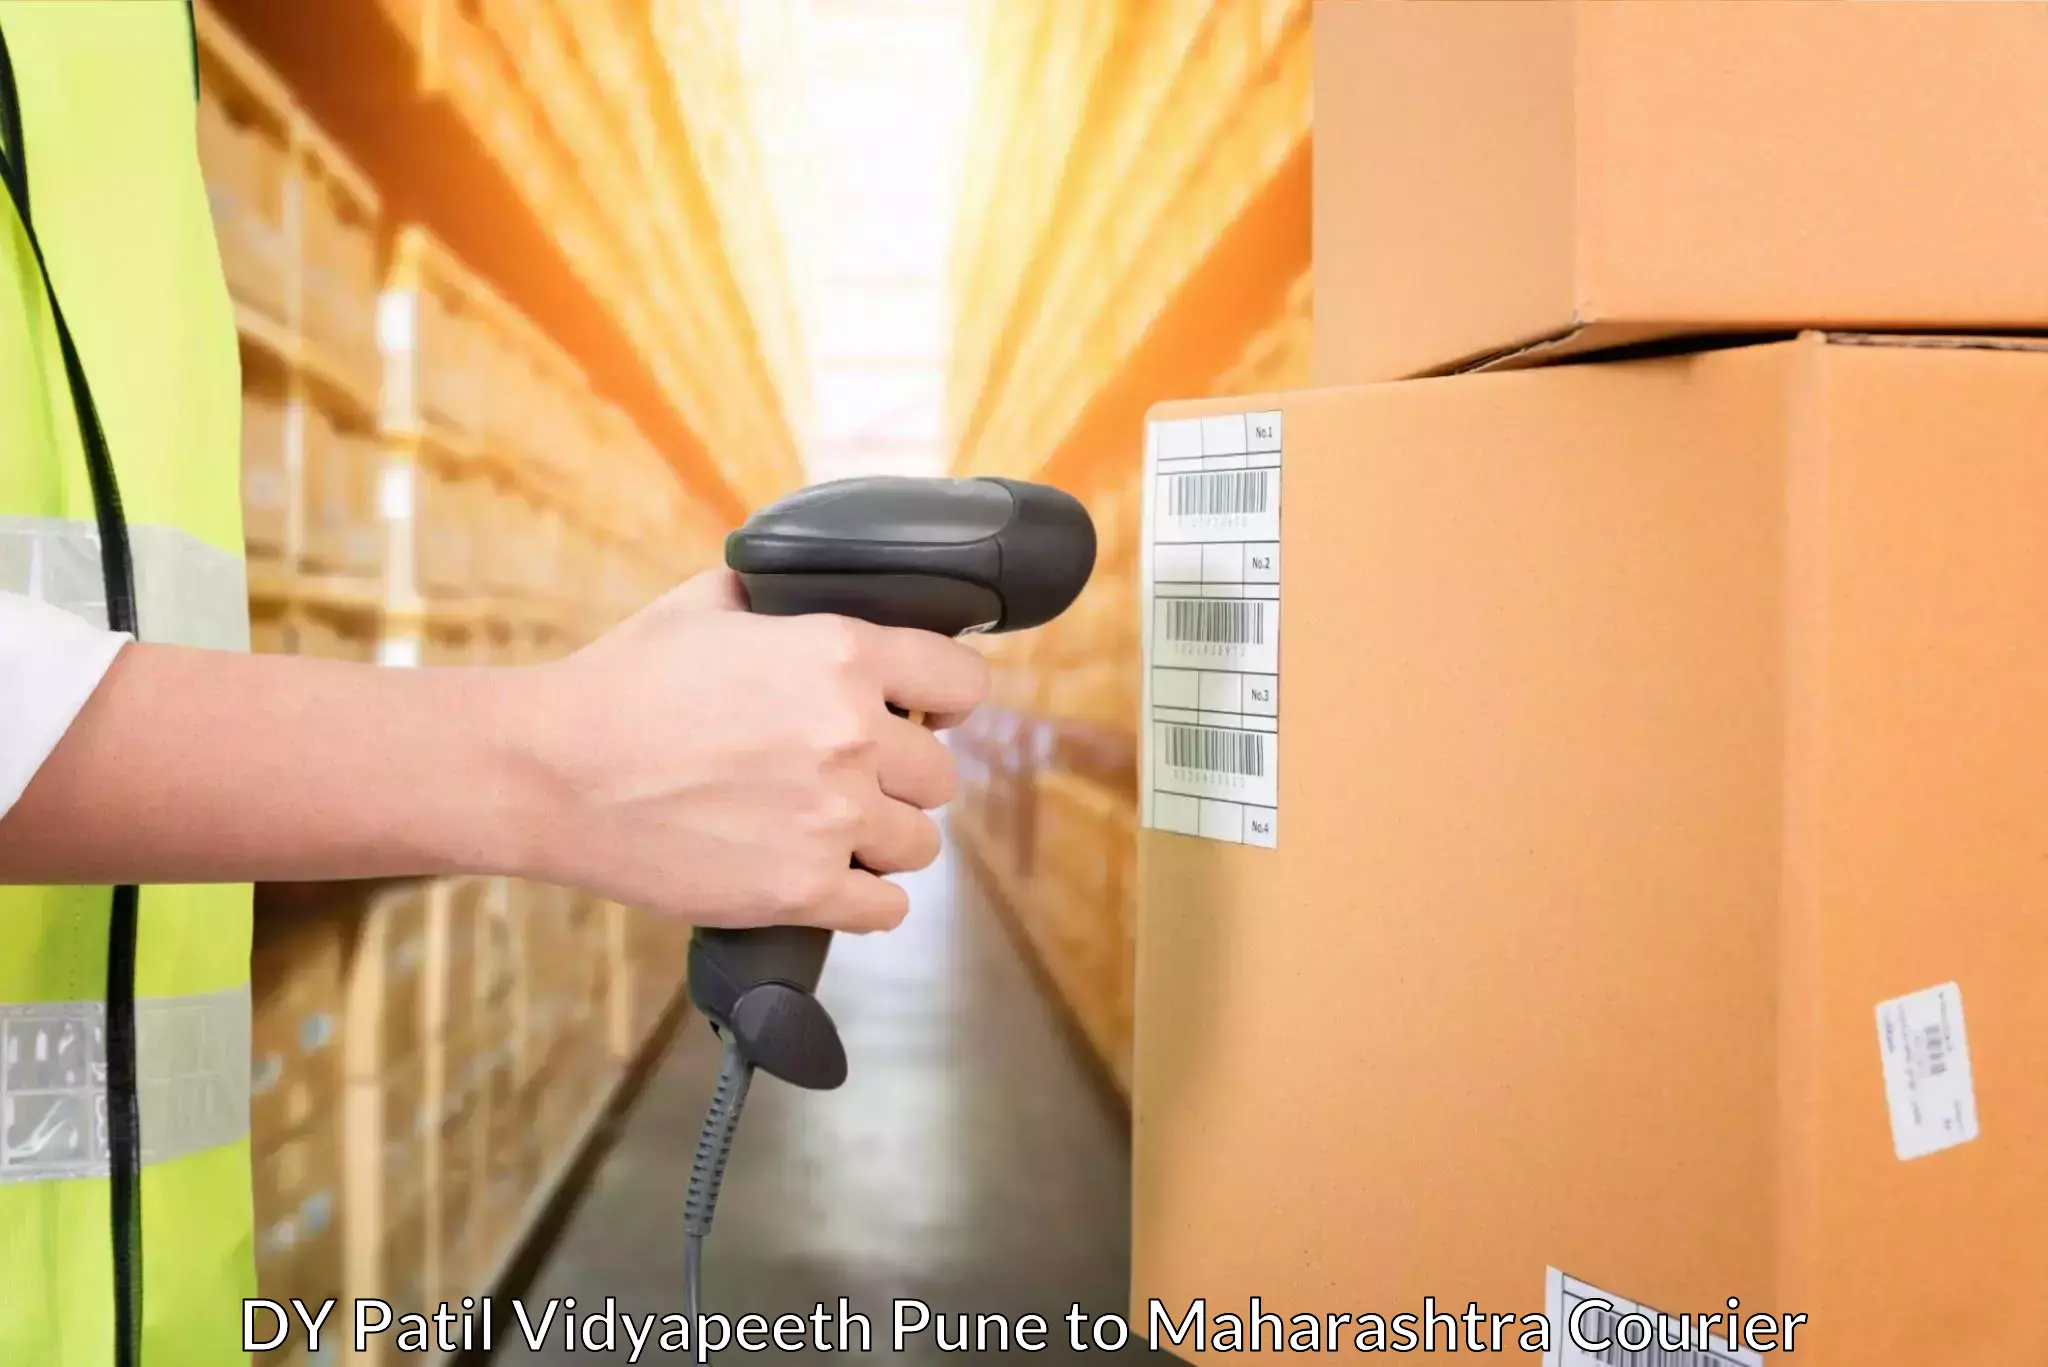 Parcel service for businesses in DY Patil Vidyapeeth Pune to Maharashtra